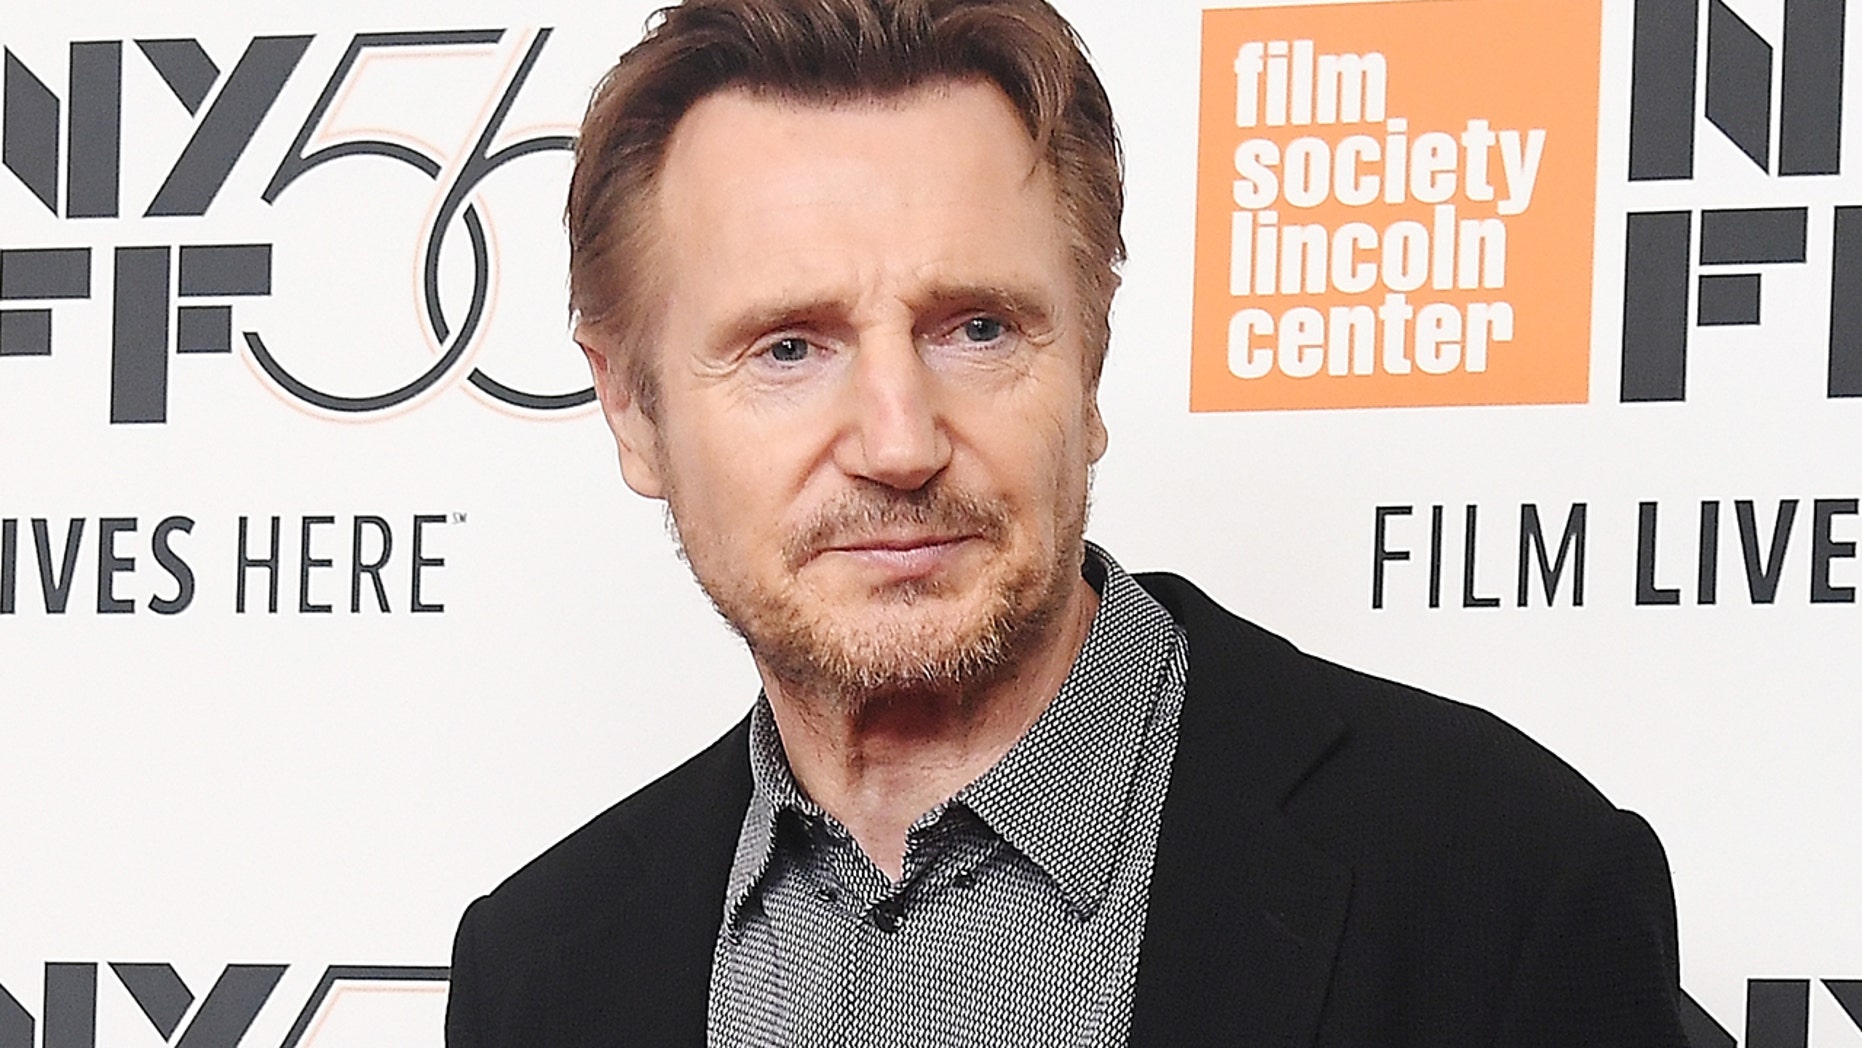 Liam Neeson says he walked the streets hoping to 